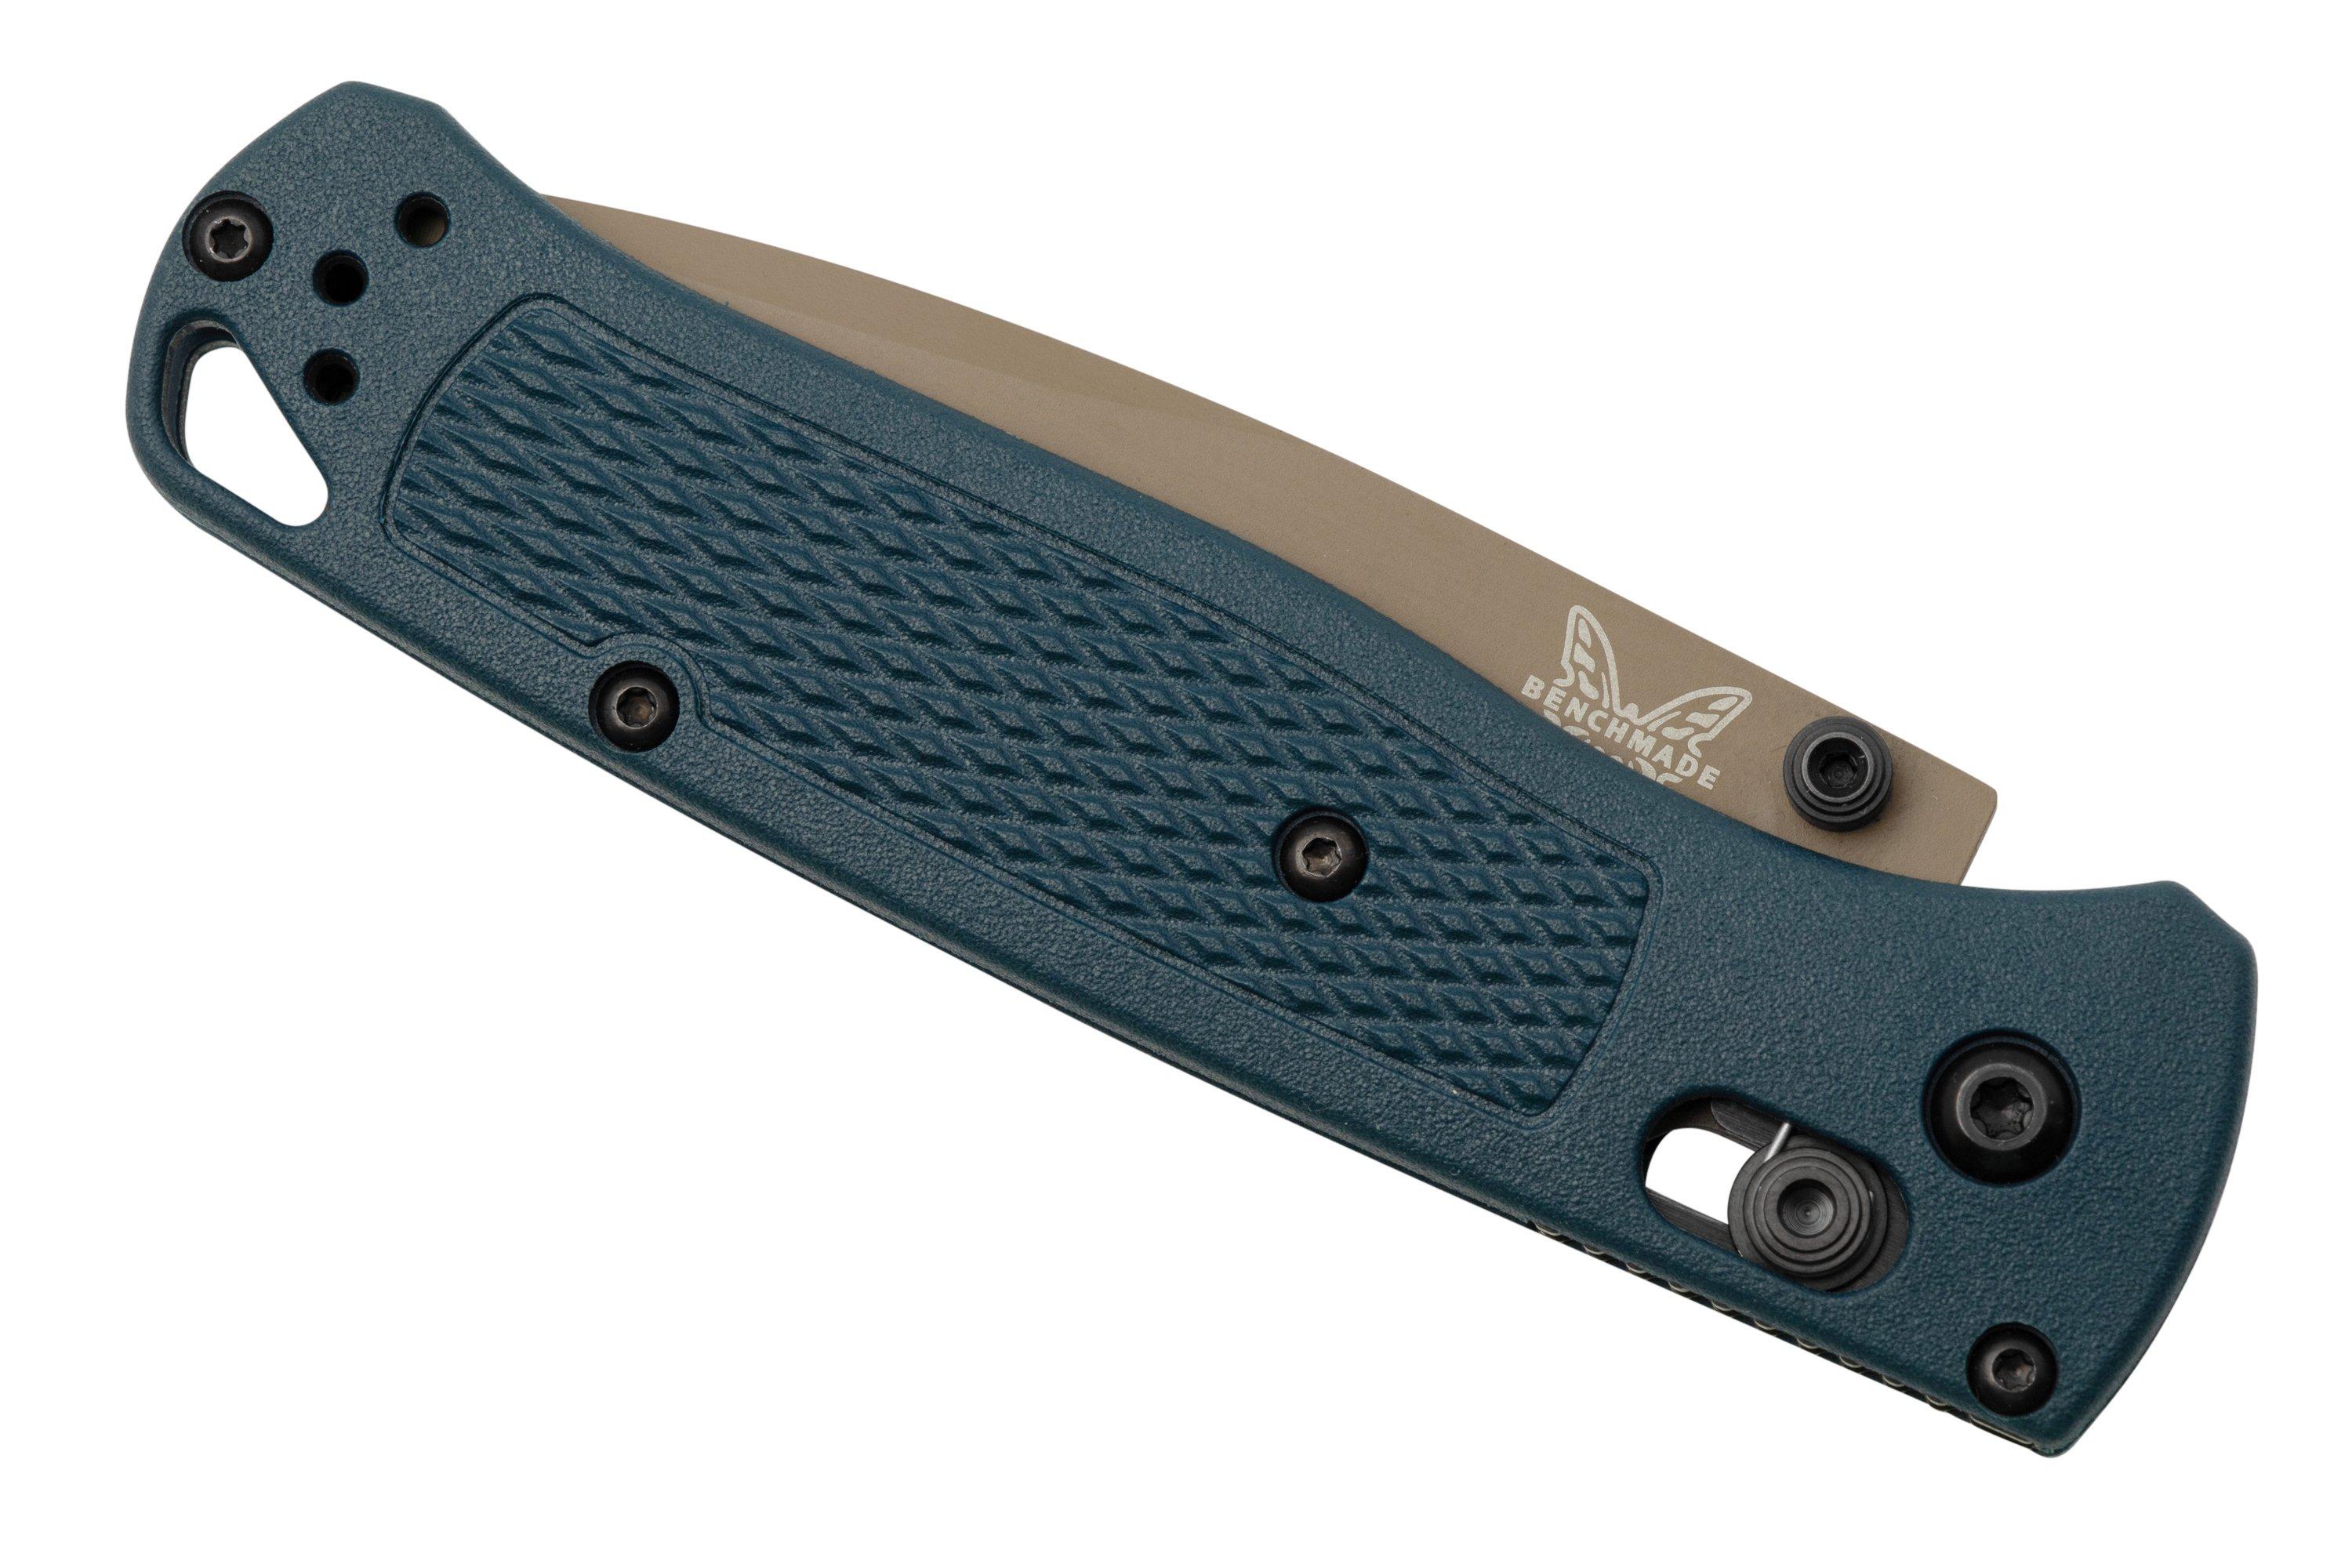  Benchmade - Bugout 535 EDC Knife with Blue Grivory